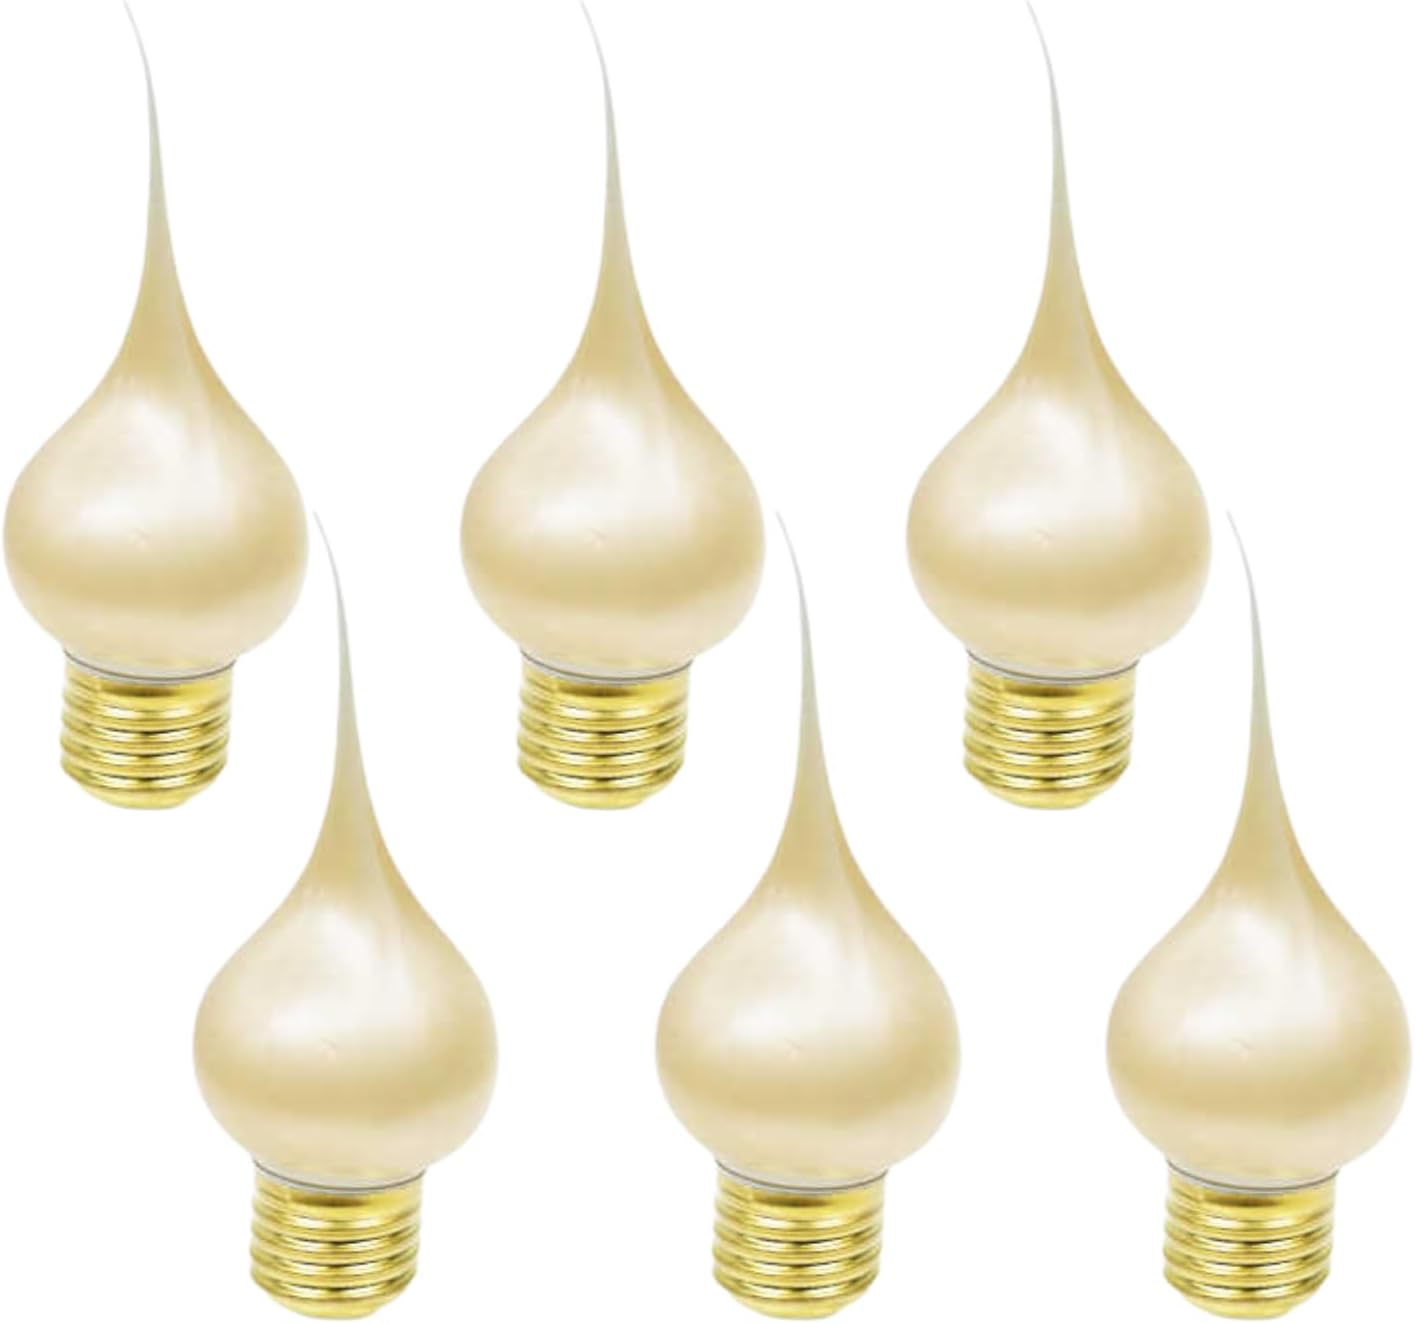 Pearlized Silicone Dipped Standard Base Incandescent Light Bulbs - 7.5W, 120V, UL Listed - Set of 6 for Charming Primitive Accents and Stylish Home Décor Standard E-26 - image 3 of 6